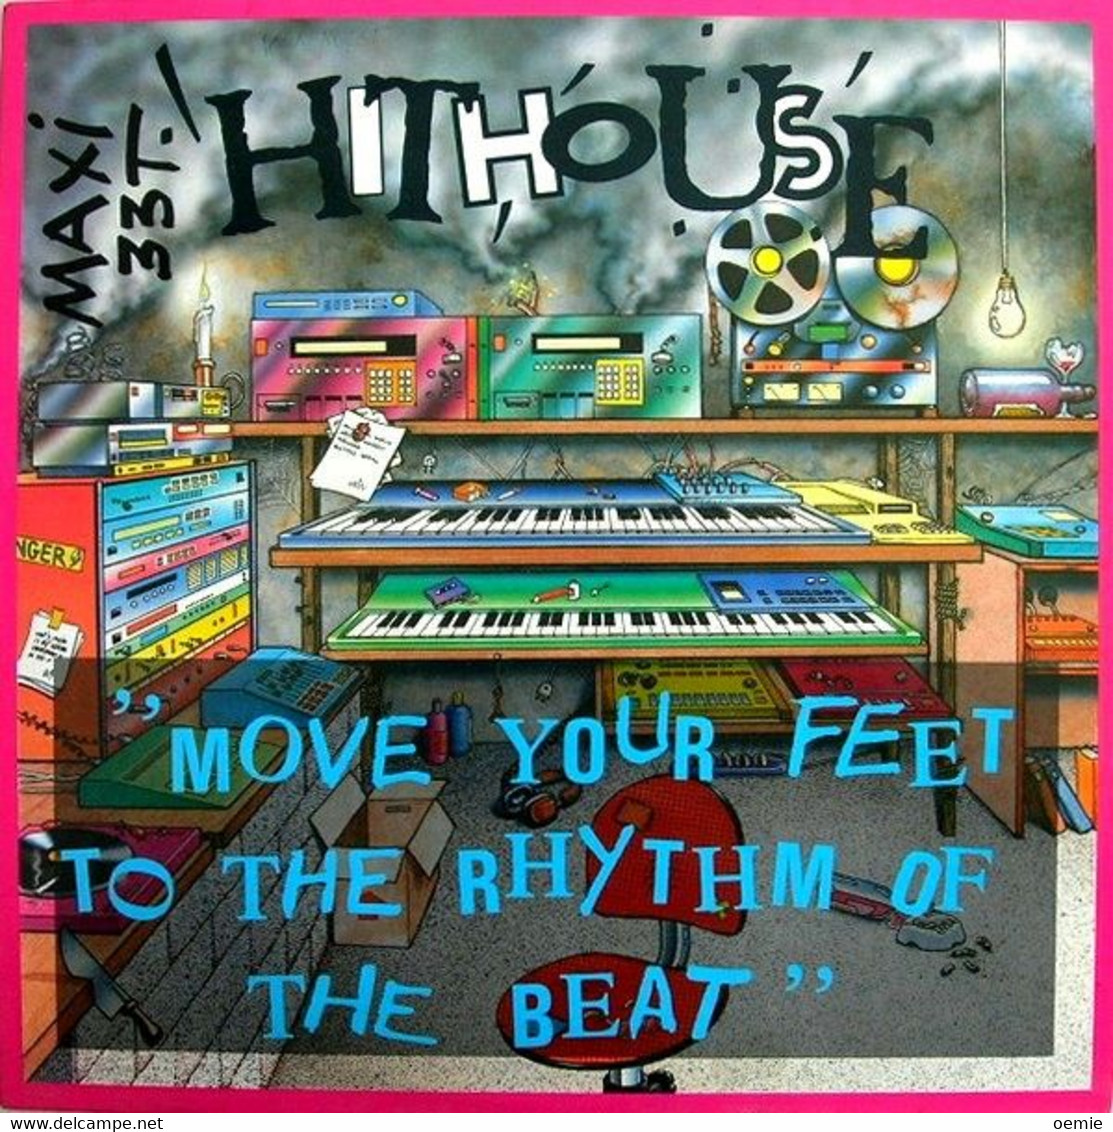 HITHOUSE °°  MOVE YOUR FEET TO THE RHYTHM OF THE BEAT  °  MAXIS 33 TOURS - 45 Rpm - Maxi-Singles